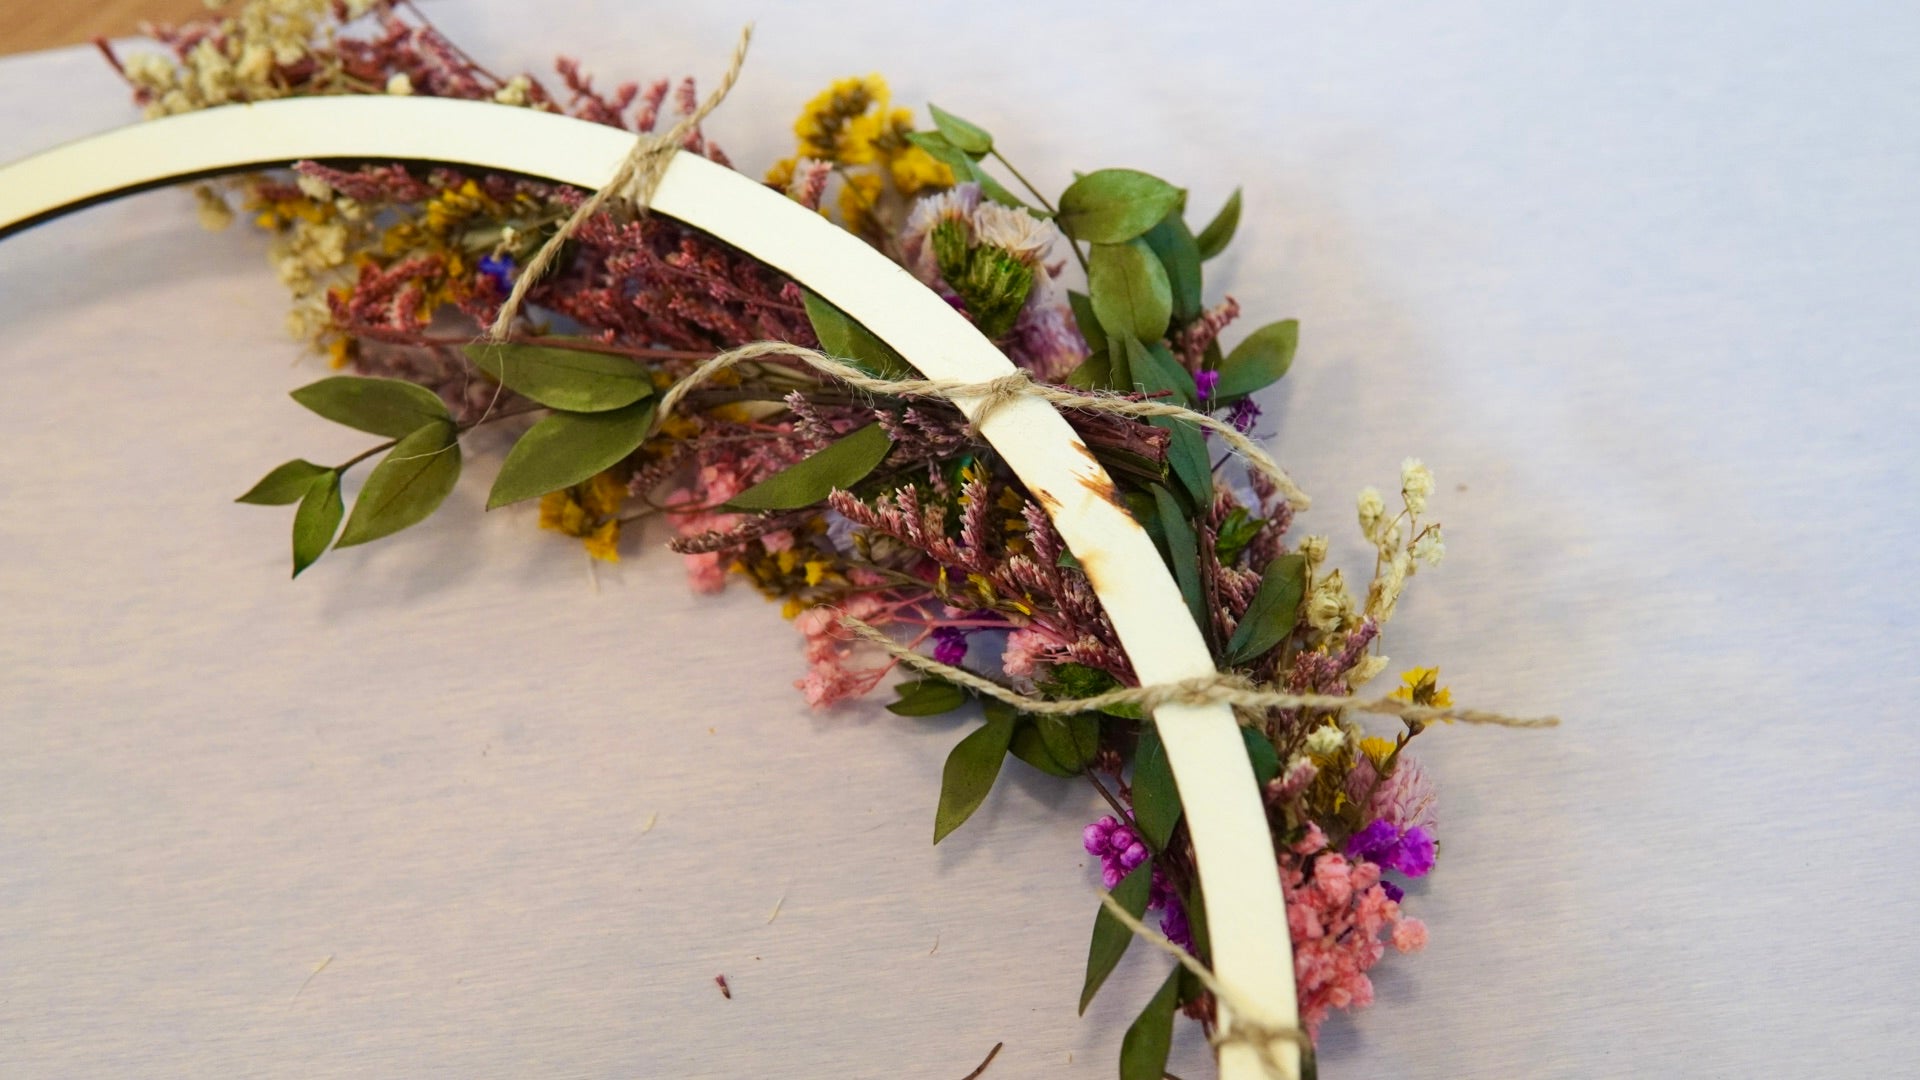 Put together a dried flower wreath